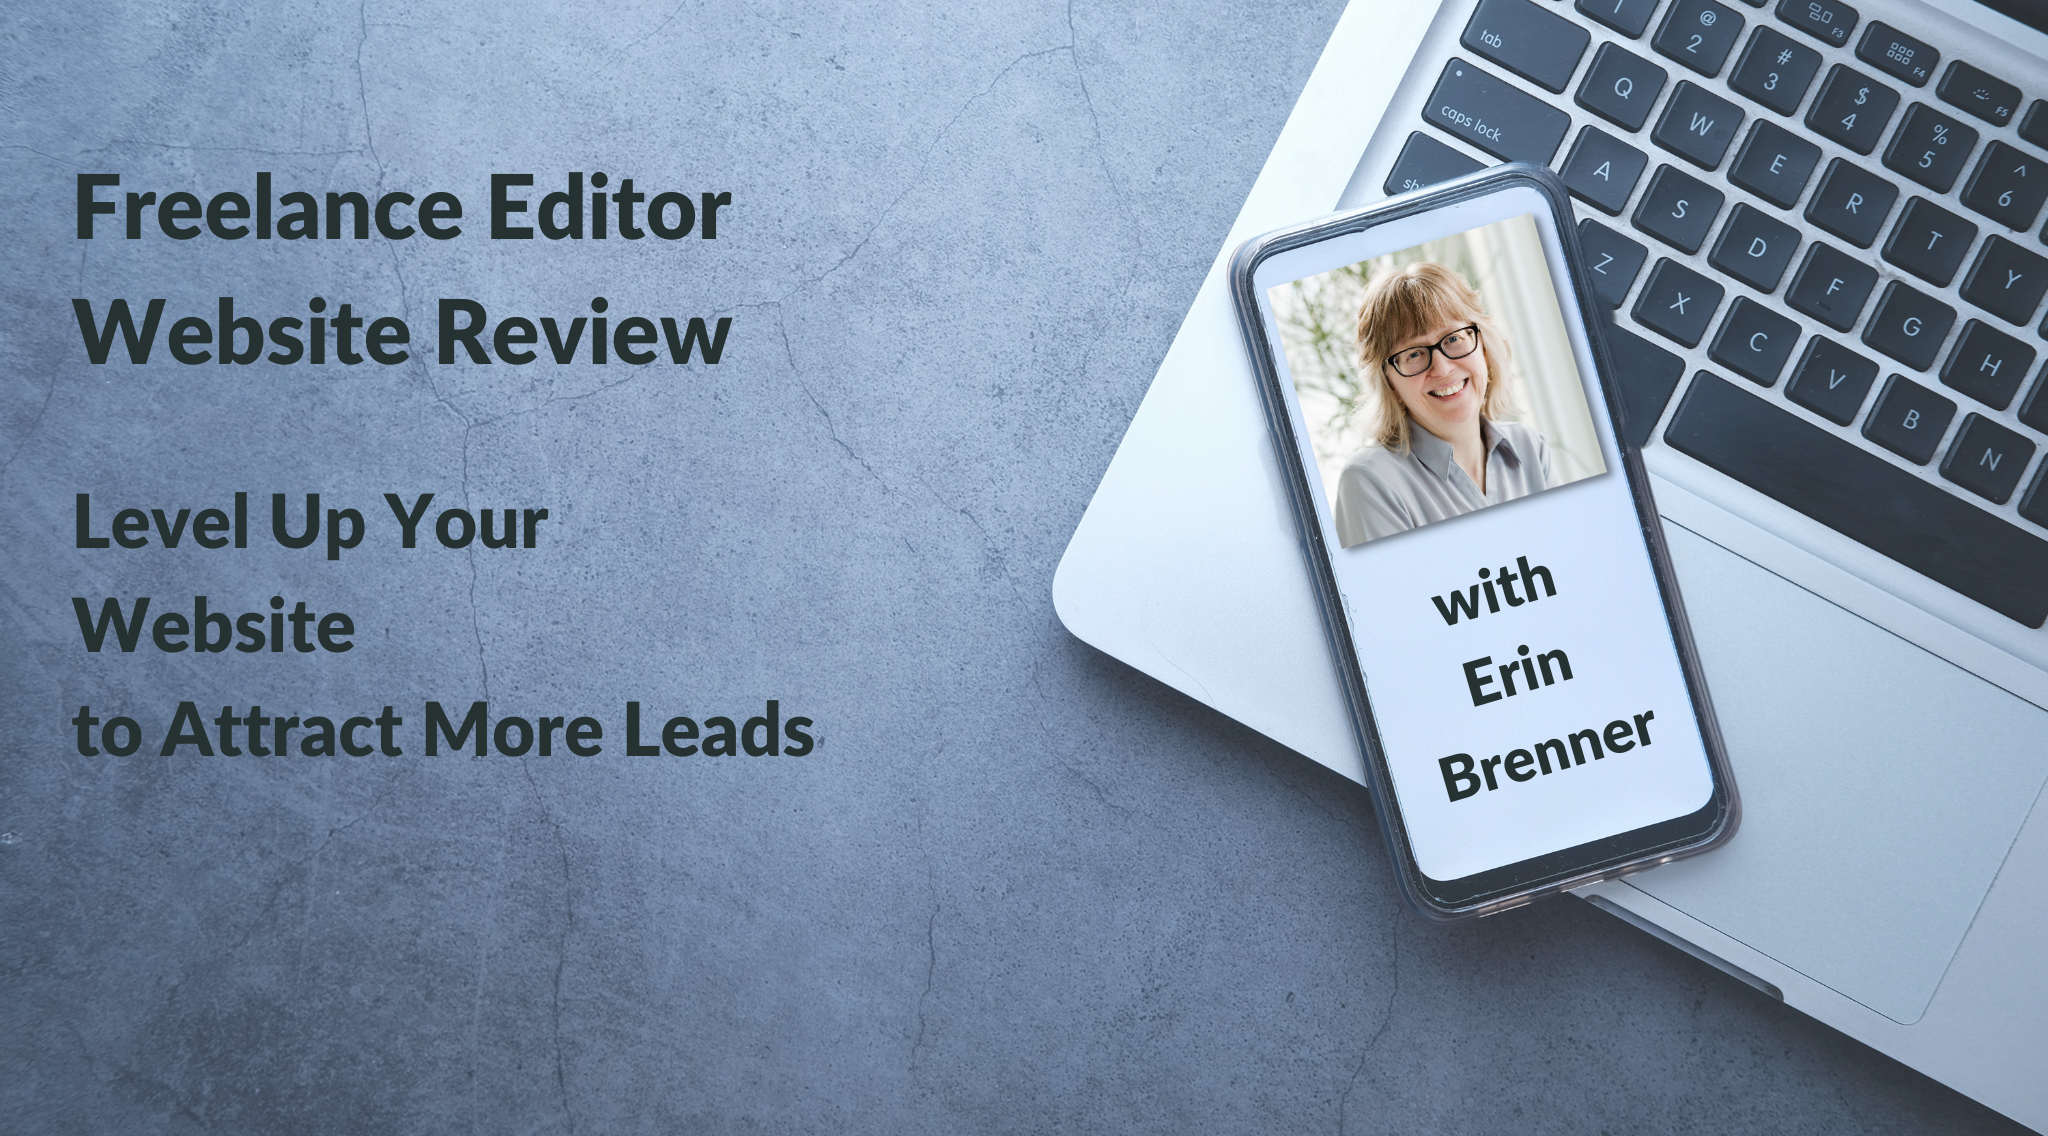 Freelance Editor Website Review with Erin Brenner